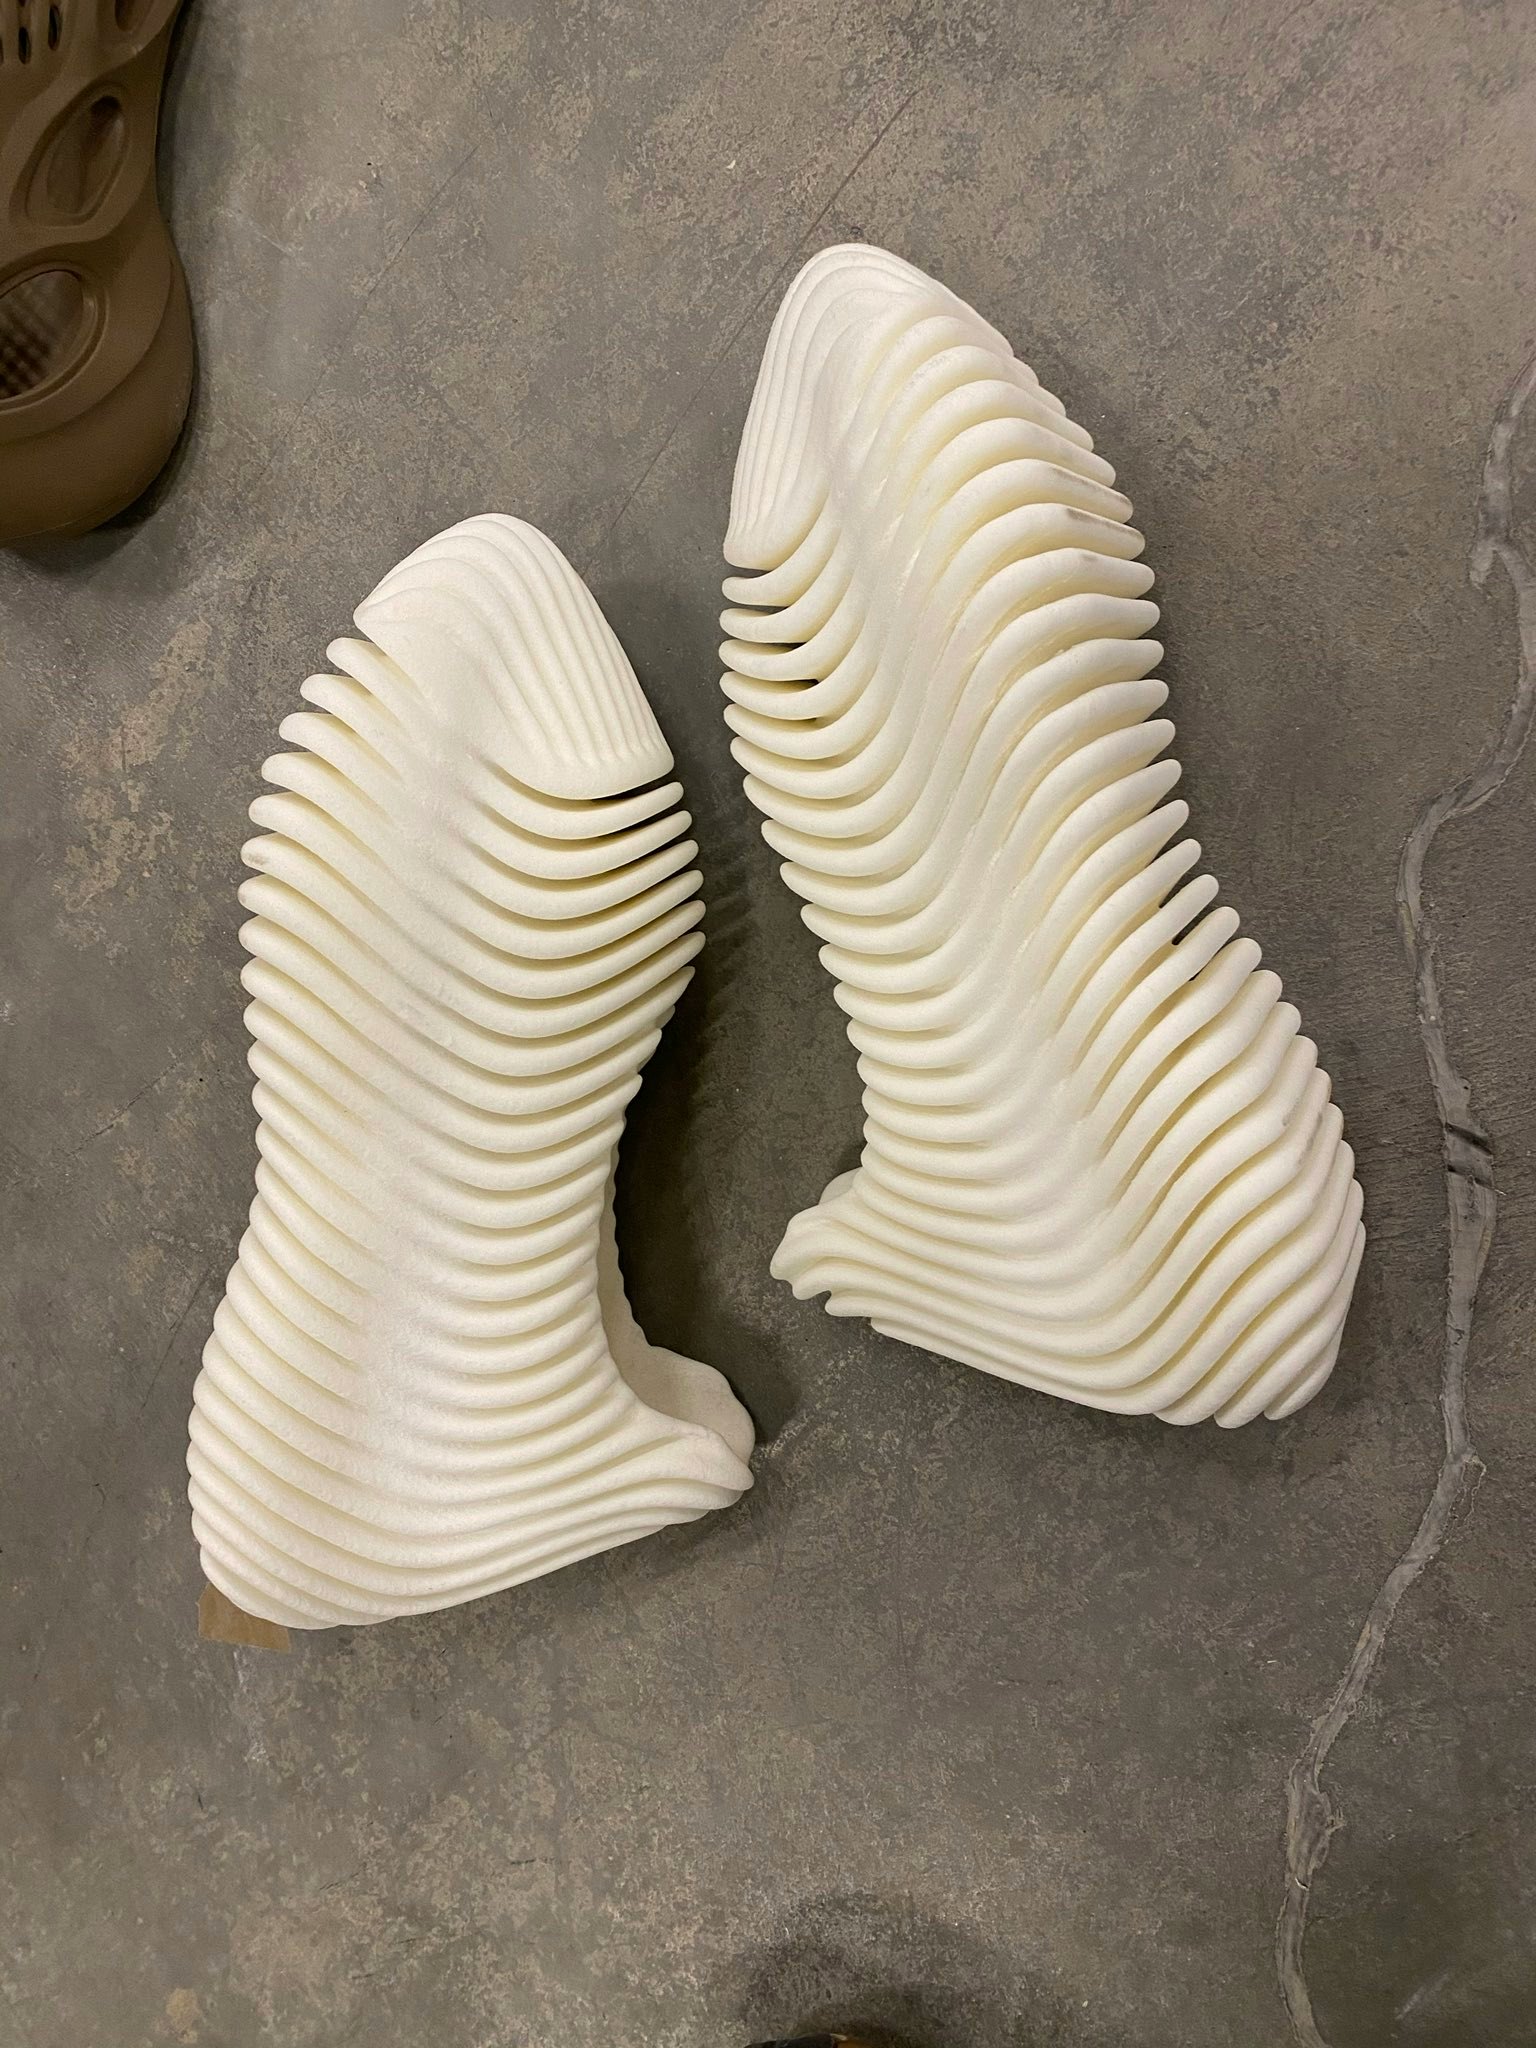 Kanye's weird-looking 'YZY Rose' sneaker will hit NBA basketball ...